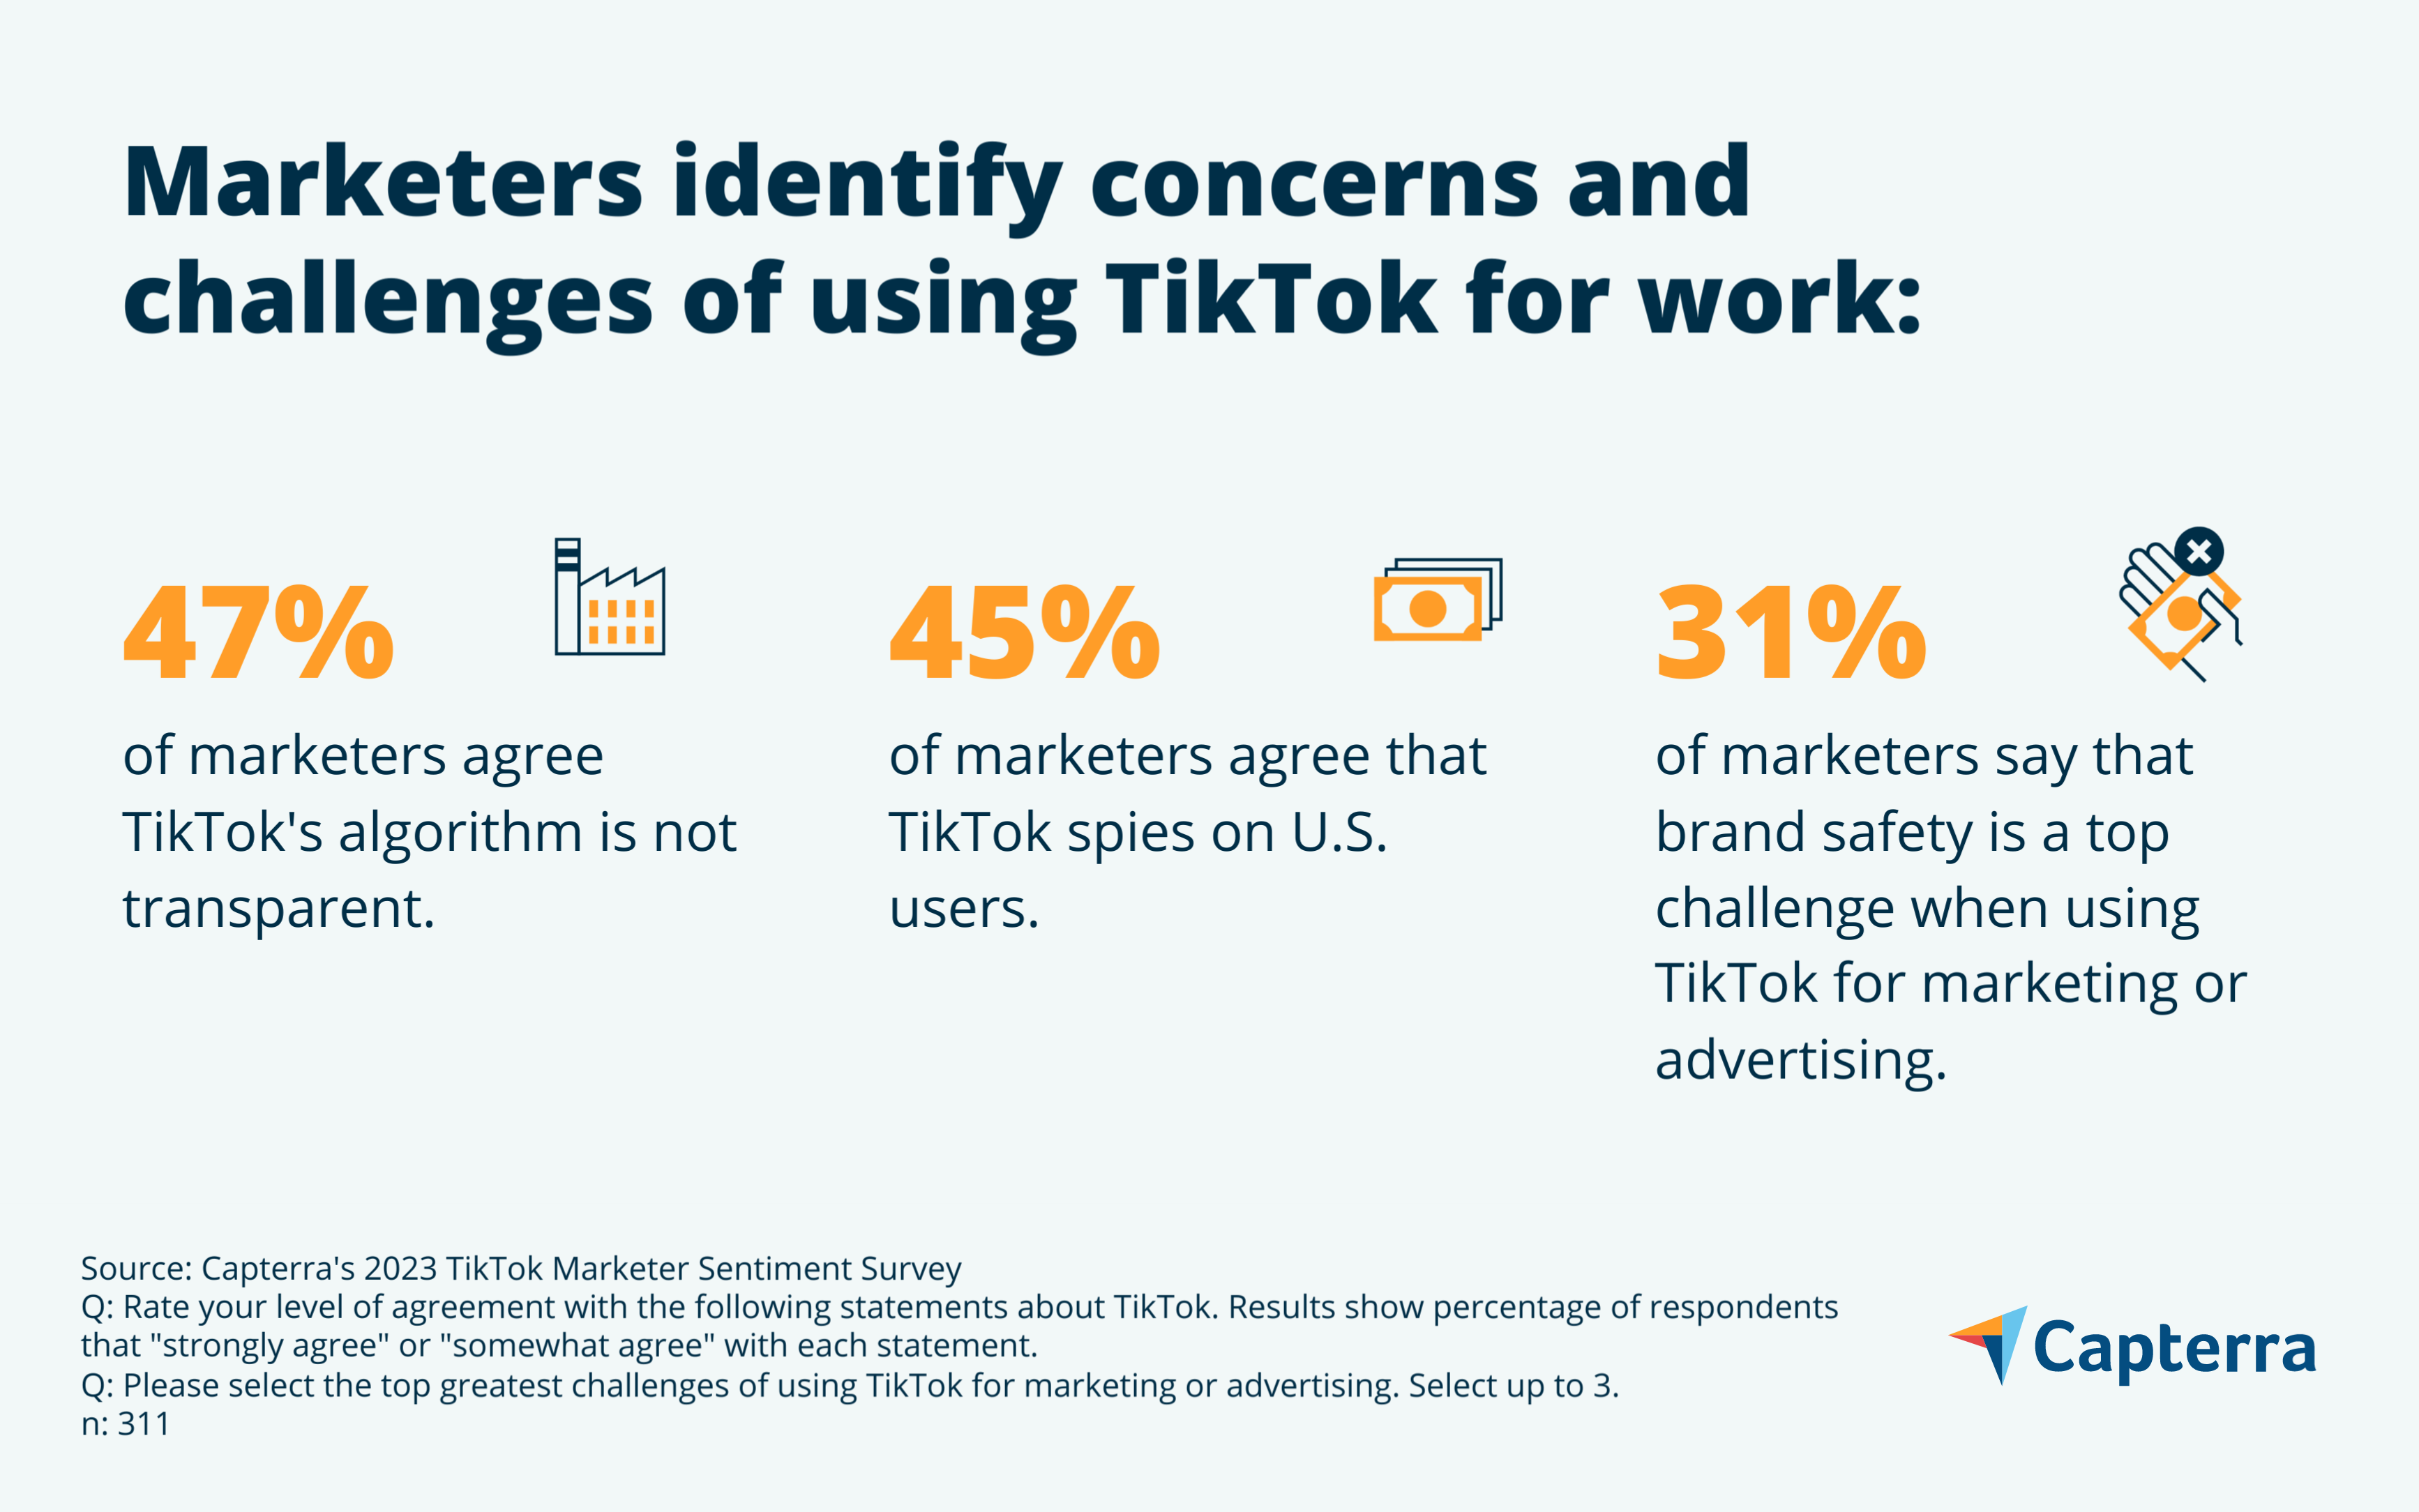 Marketers identify concerns and challenges of using TikTok for work